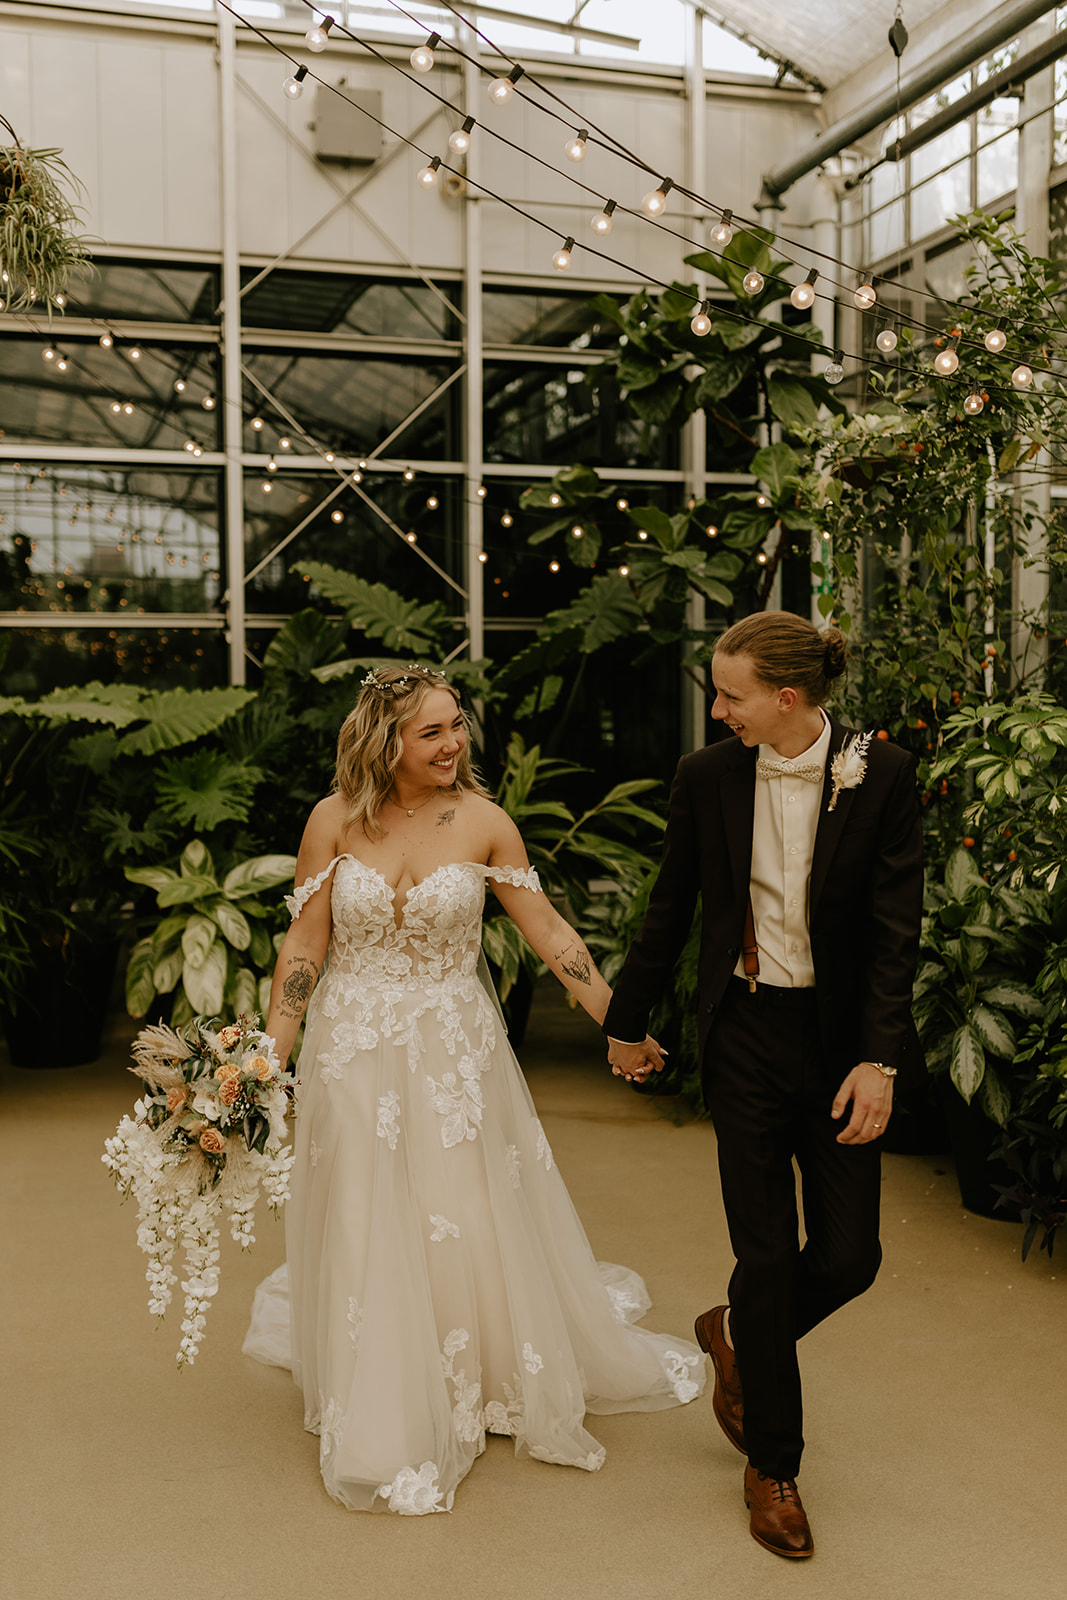 Artistic wedding photos at the Downtown Market greenhouse in Grand Rapids, Michigan